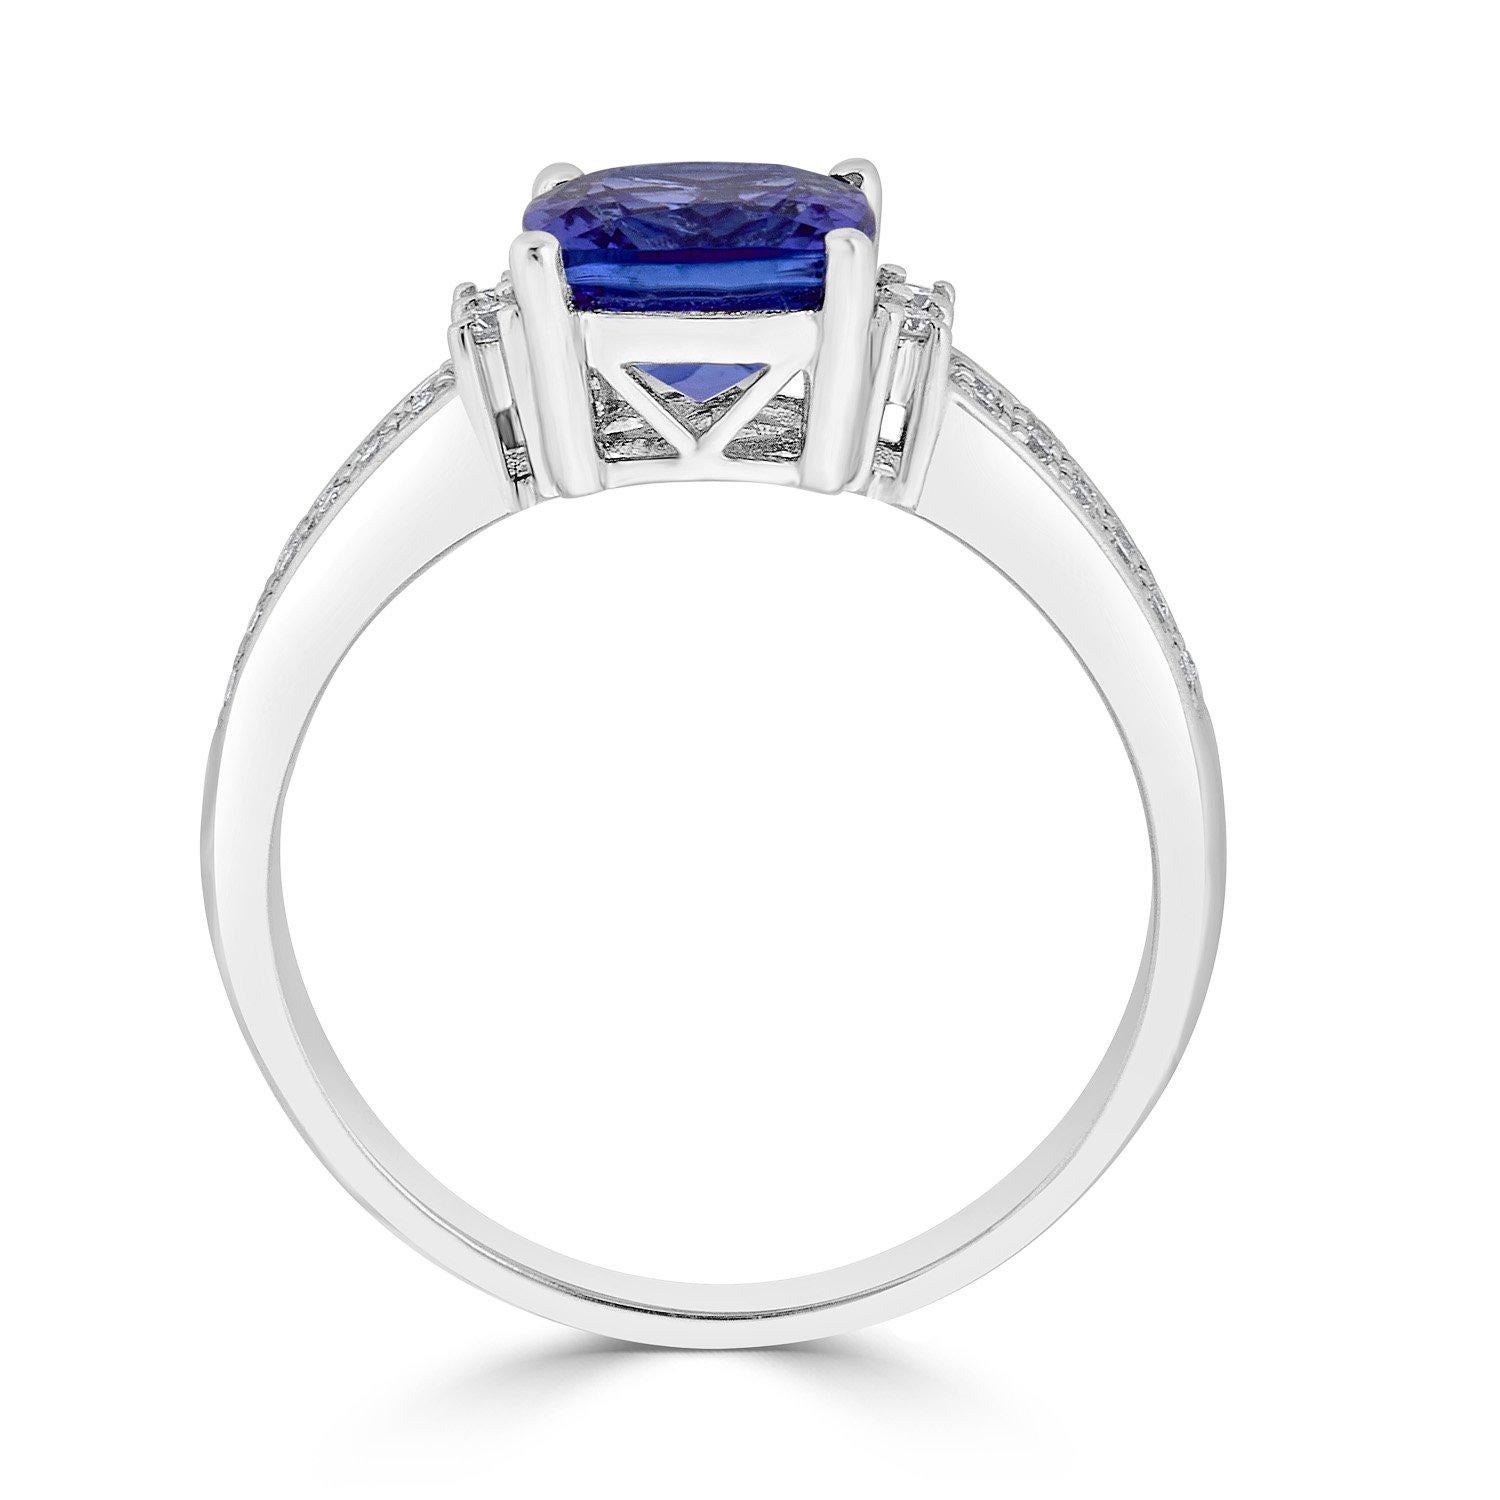 1.68Ct Tanzanite Ring with 0.19Tct Diamonds Set in 14K White Gold For Sale 1